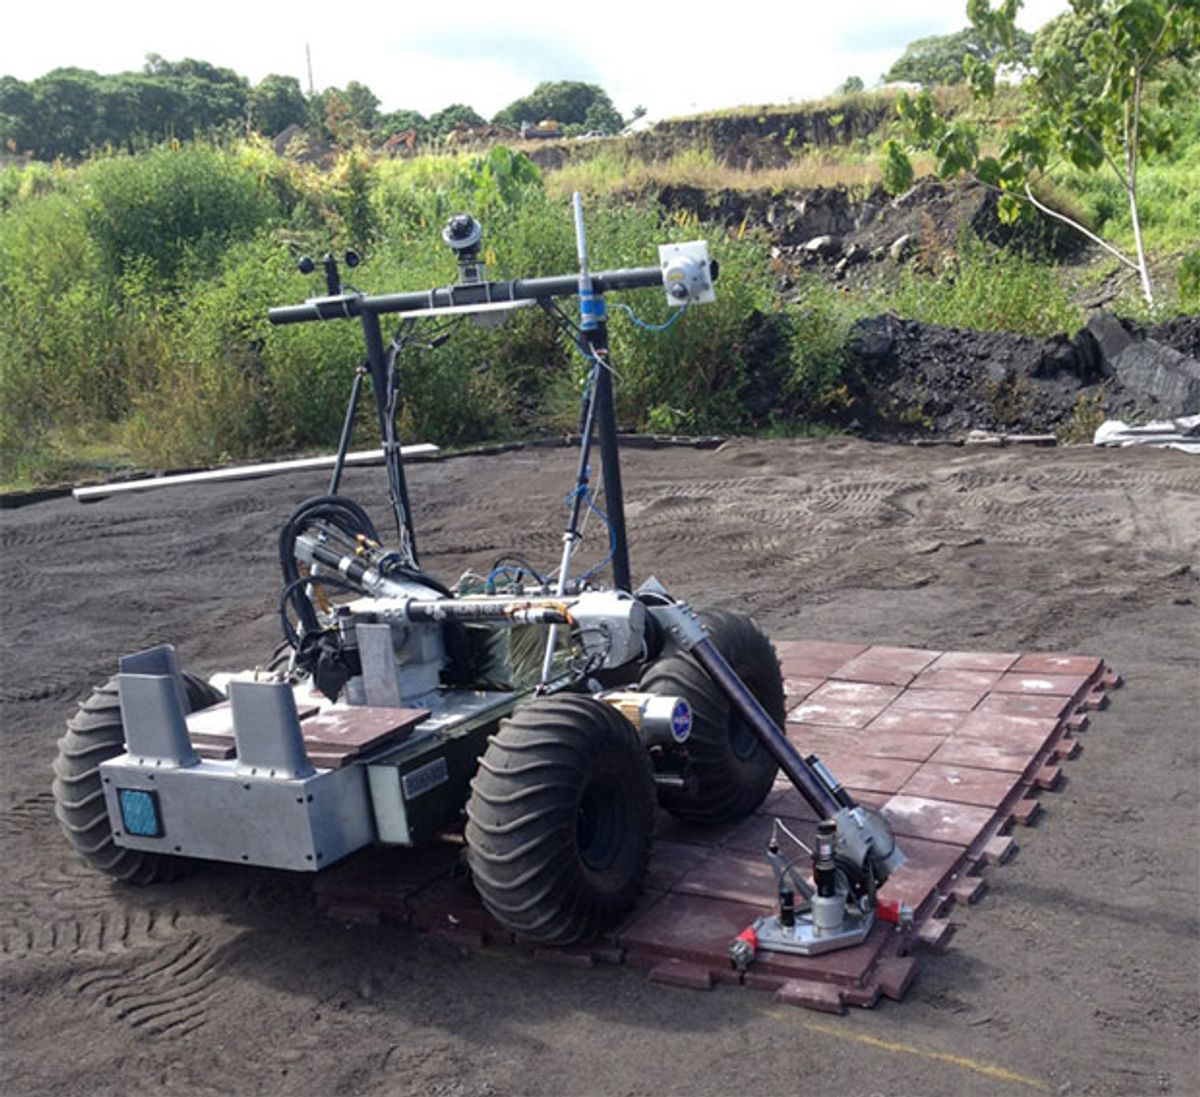 Hawaiian Robot Practices Landing Pad Construction for Space Exploration